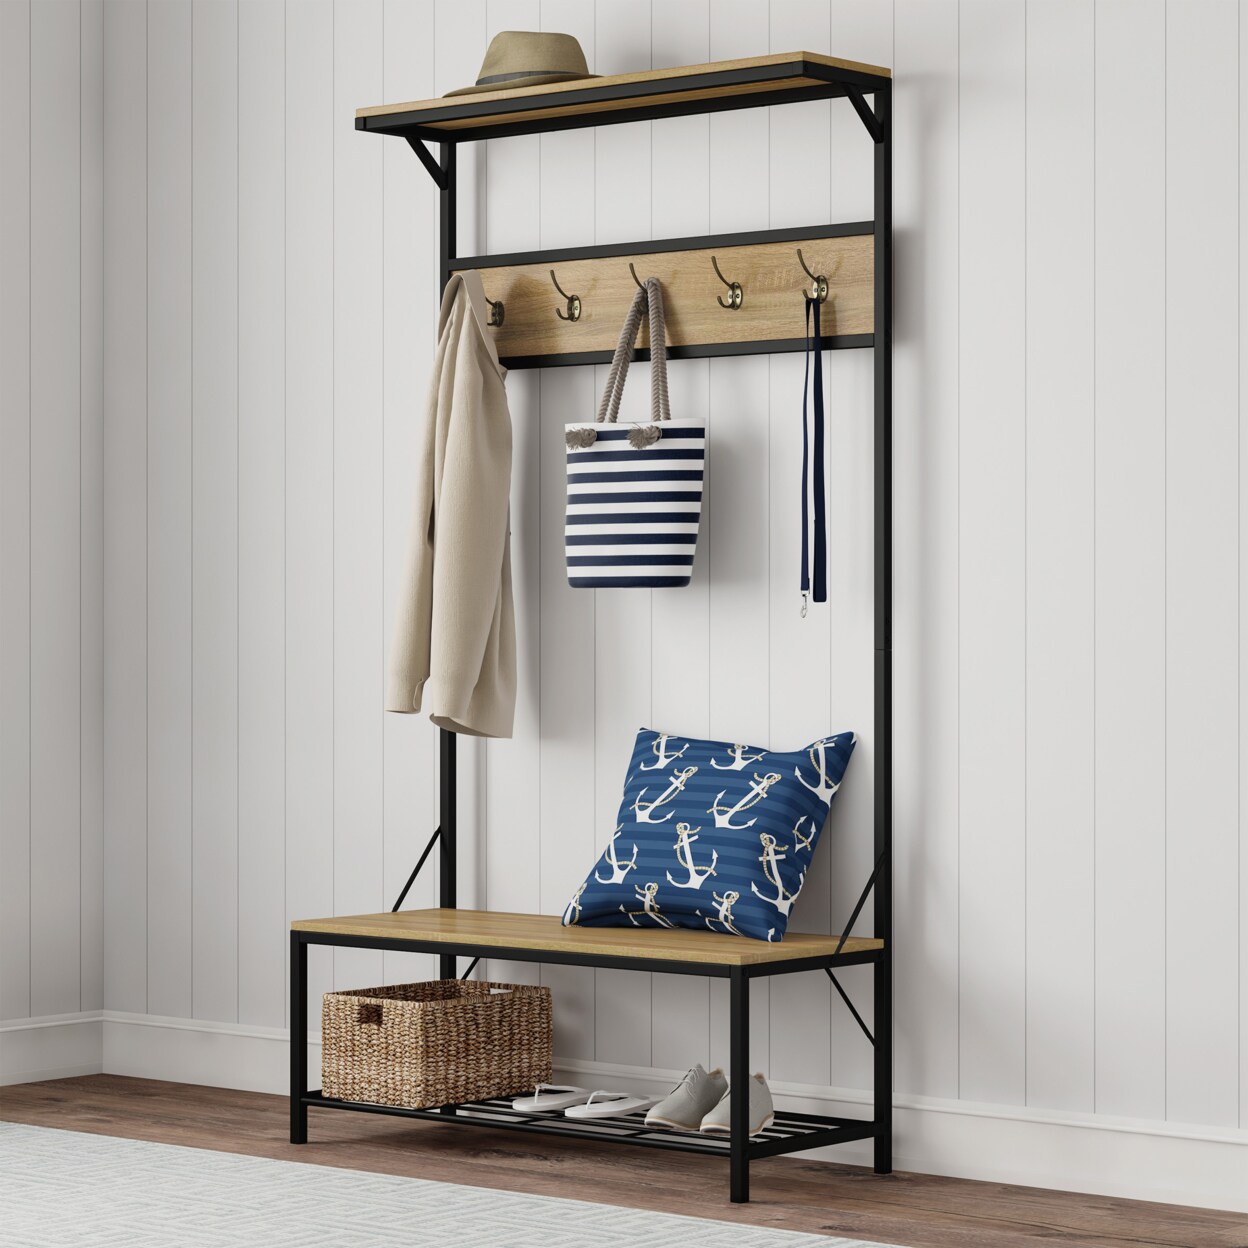 Lavish Home Entryway Storage Bench- Metal Hall Tree with Seat, Coat Hooks  and Shoe Storage